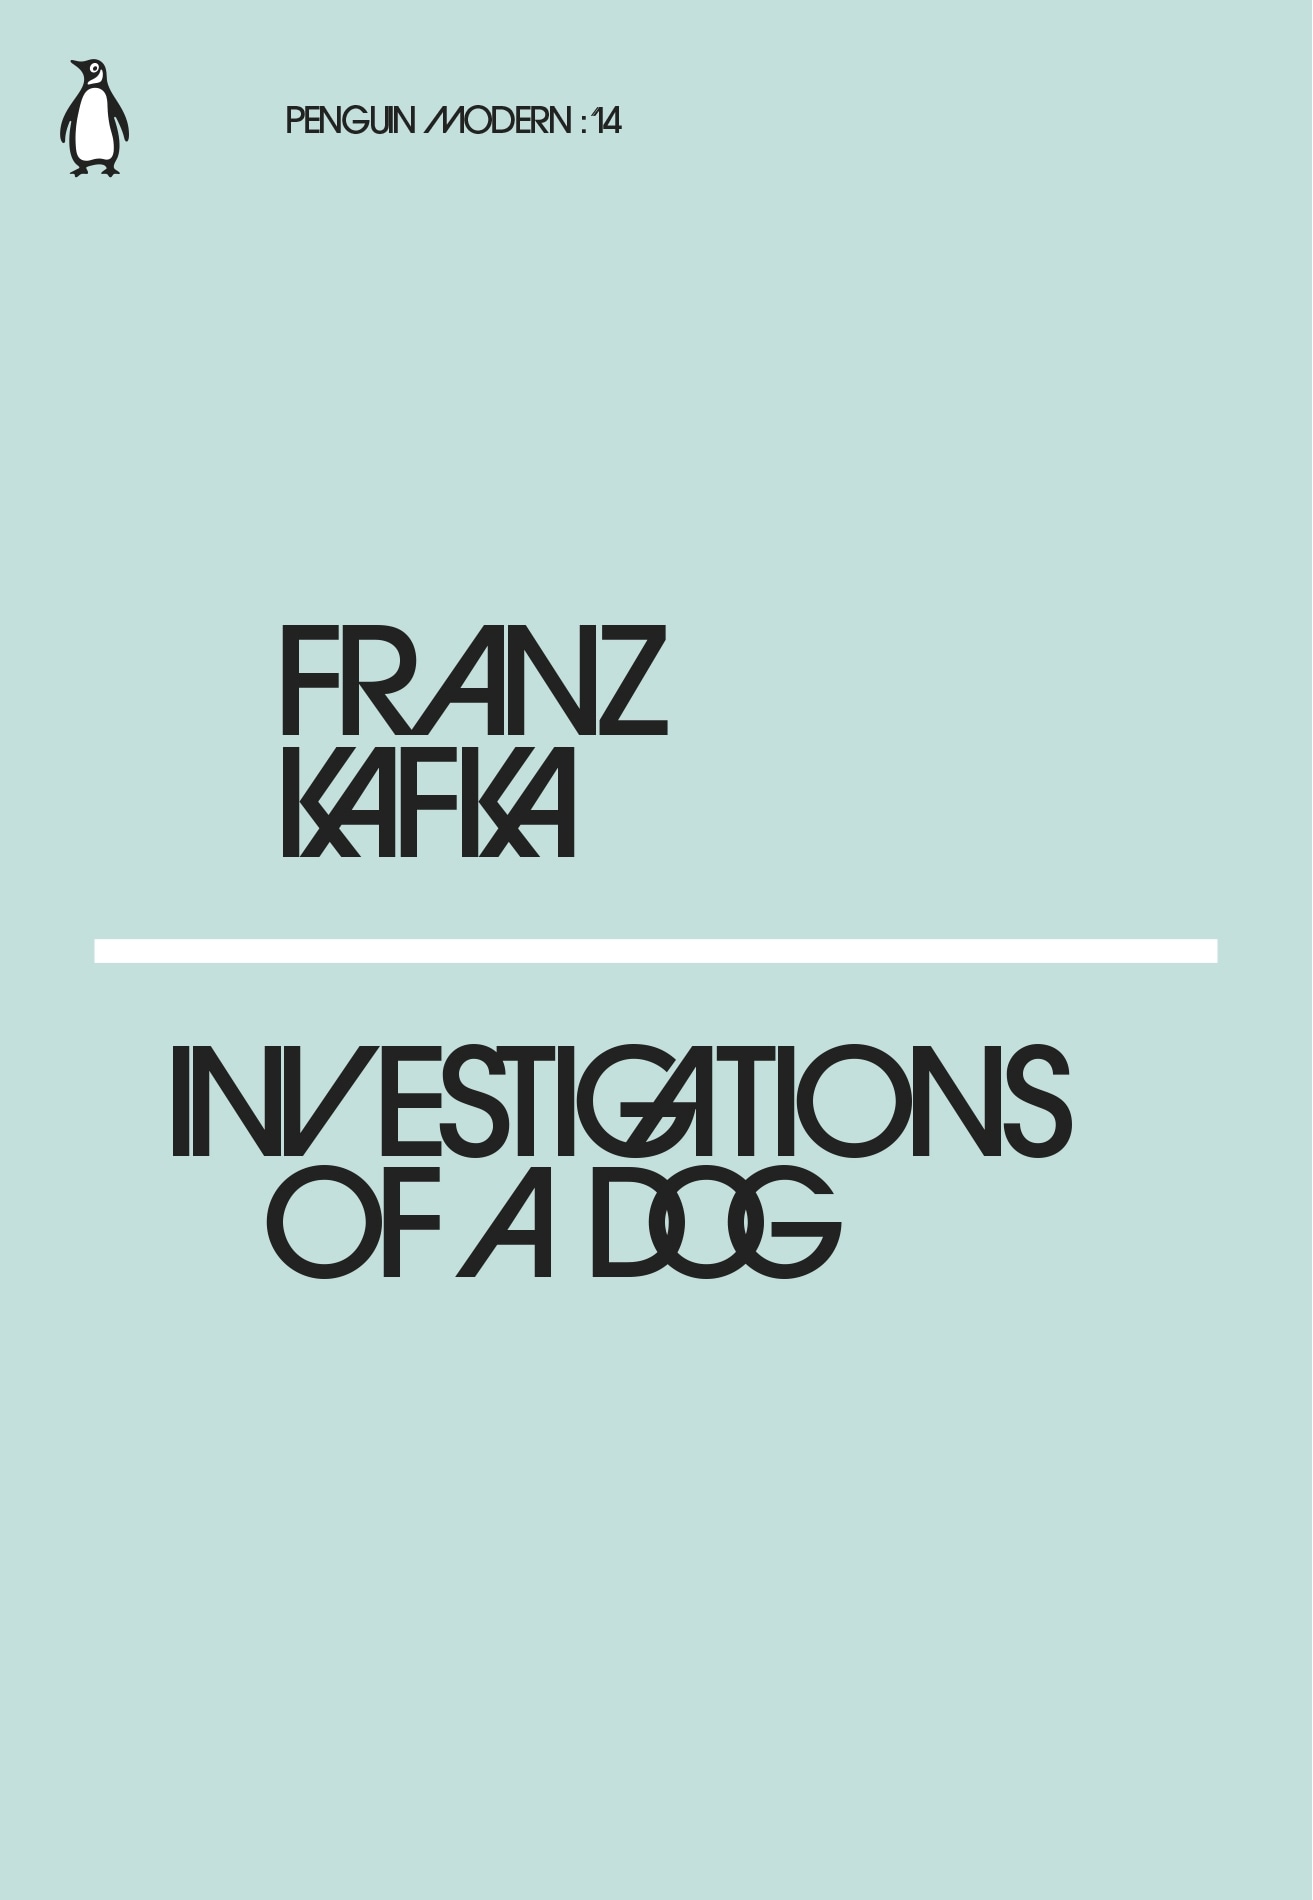 Book “Investigations of a Dog” by Franz Kafka — February 22, 2018